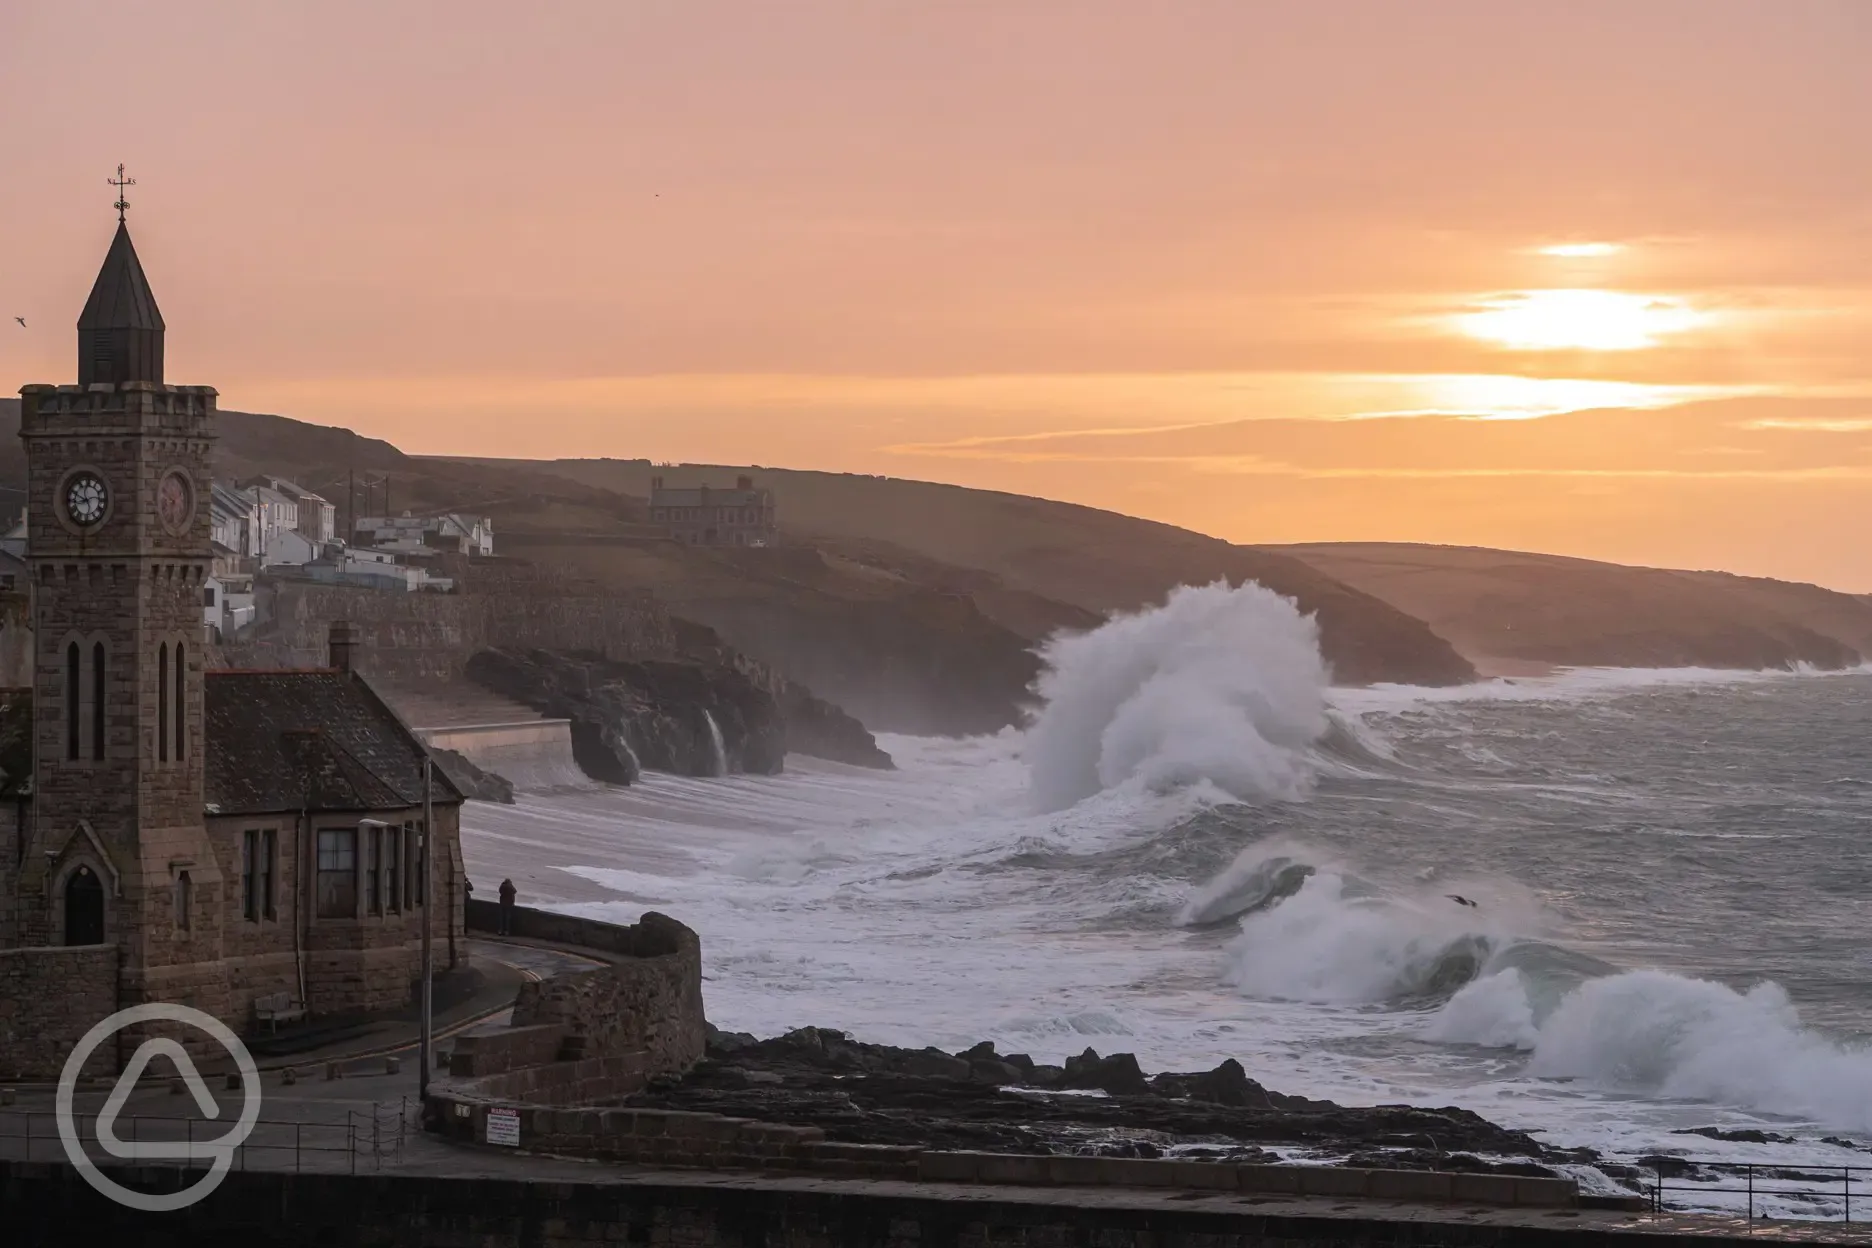 Porthleven Harbour - 25 minutes from the site